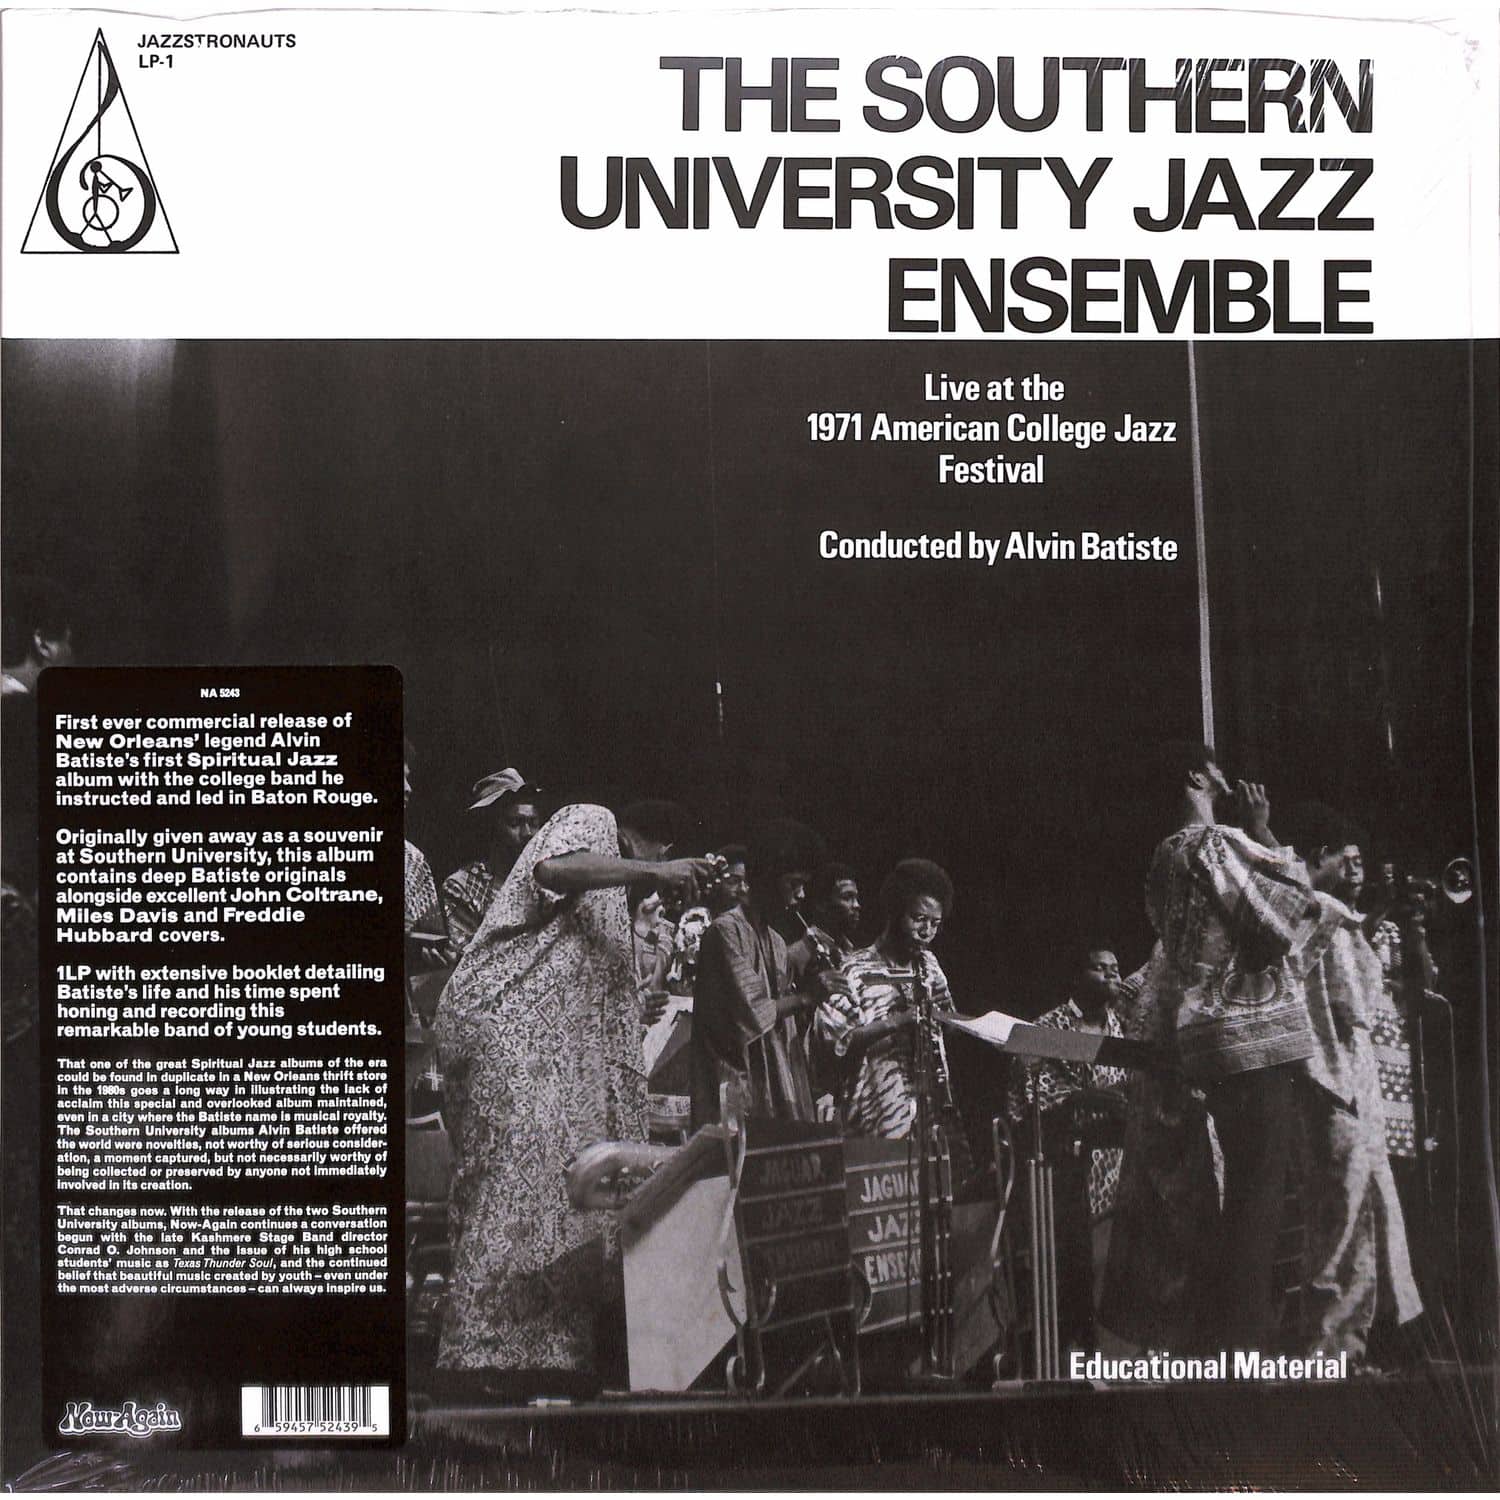 Southern University Jazz Ensemble - LIVE AT THE 1971 AMERICAN COLLEGE JAZZ FESTIVAL